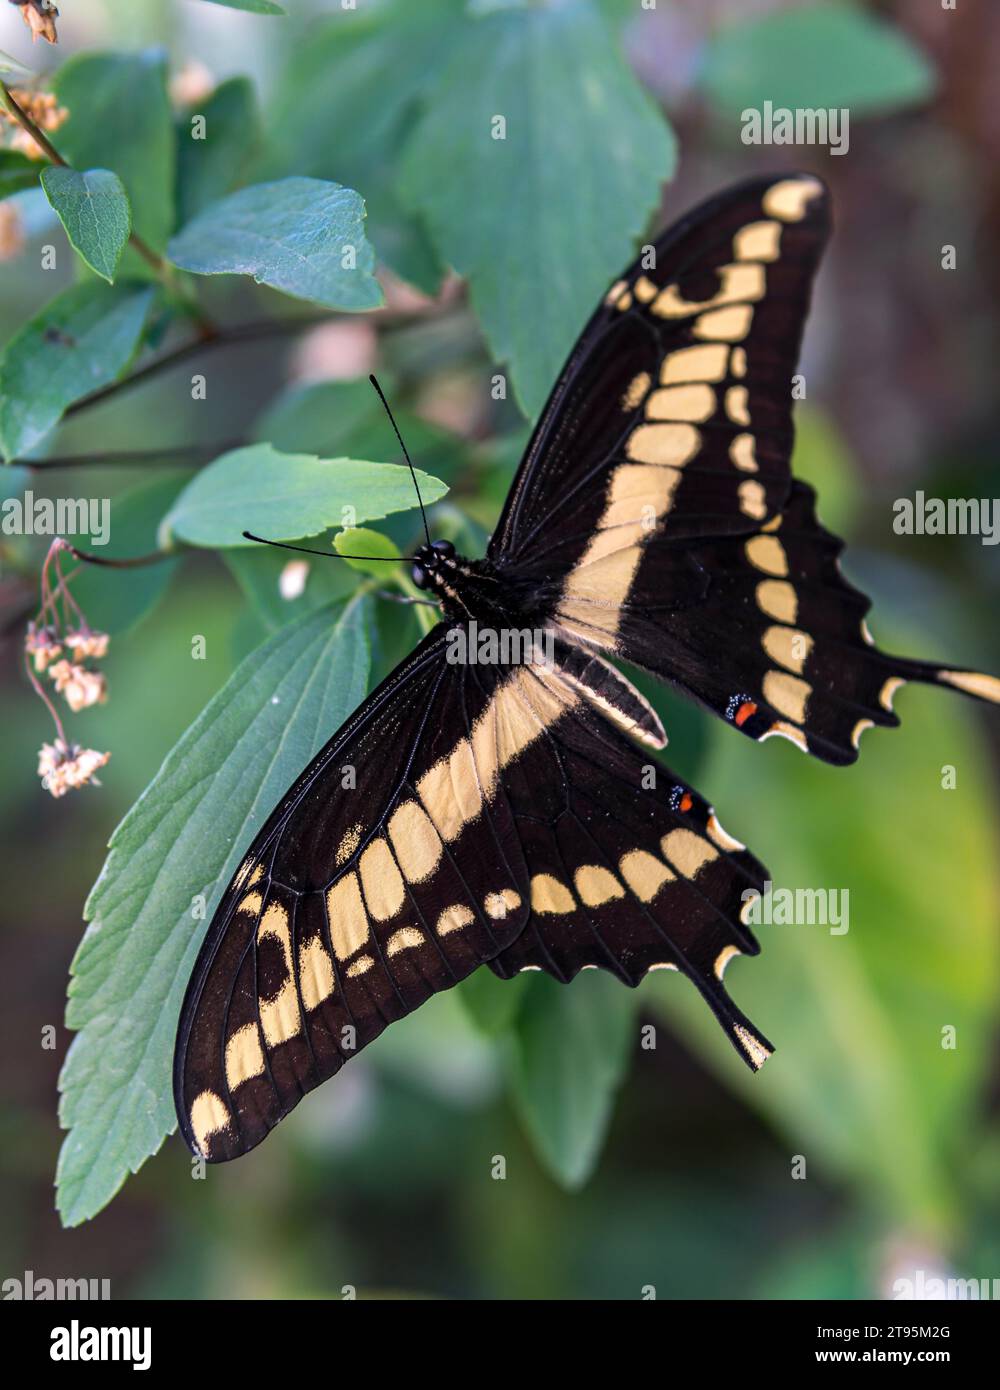 Giant Swallowtail Butterfly Decals